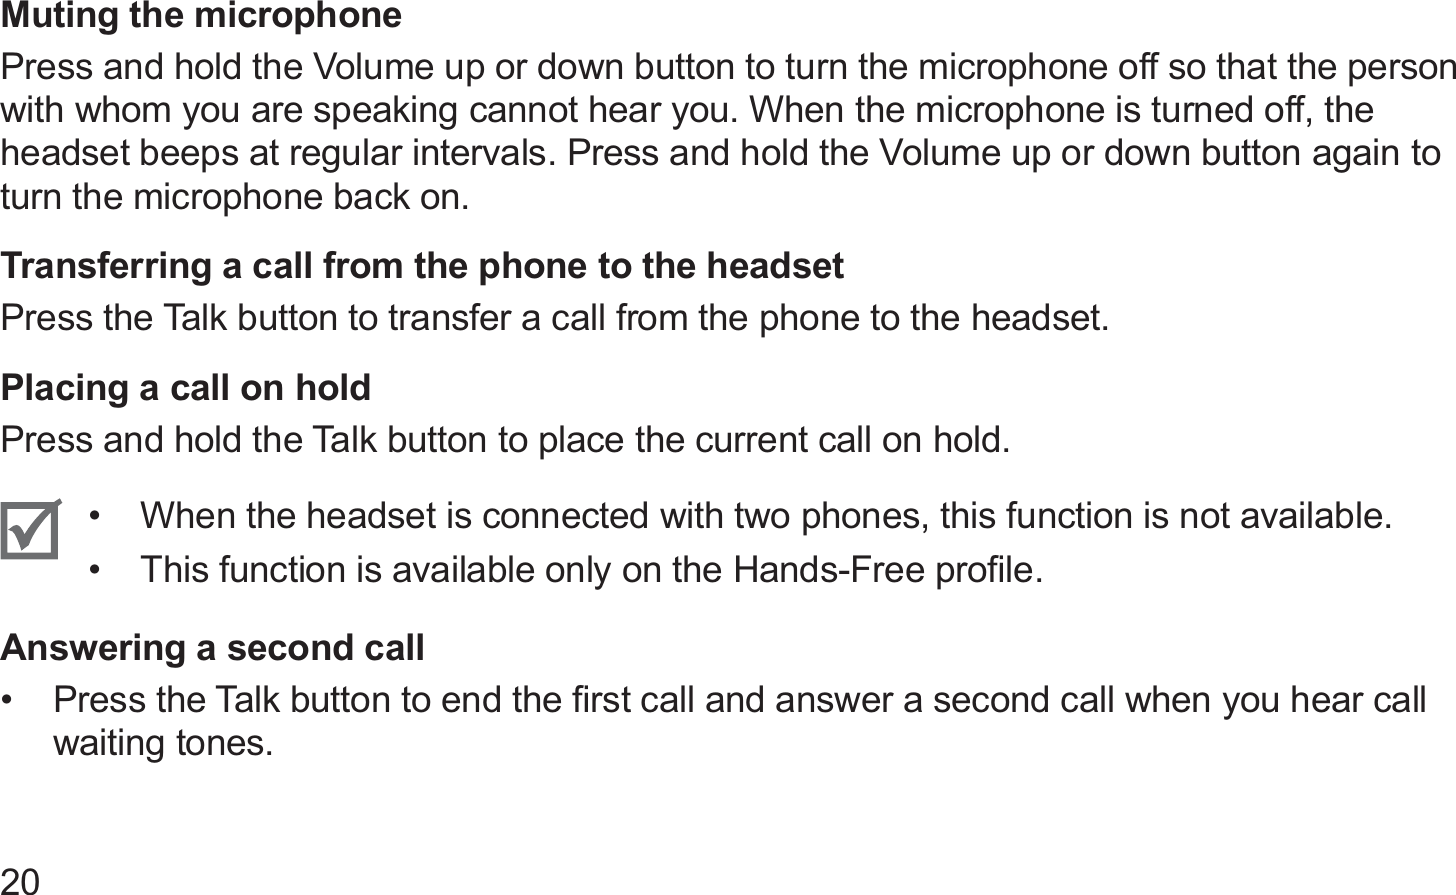 20Muting the microphonePress and hold the Volume up or down button to turn the microphone off so that the person with whom you are speaking cannot hear you. When the microphone is turned off, the headset beeps at regular intervals. Press and hold the Volume up or down button again to turn the microphone back on.Transferring a call from the phone to the headsetPress the Talk button to transfer a call from the phone to the headset.Placing a call on holdPress and hold the Talk button to place the current call on hold. When the headset is connected with two phones, this function is not available.• This function is available only on the Hands-Free proﬁle.• Answering a second callPress the Talk button to end the ﬁrst call and answer a second call when you hear call • waiting tones.